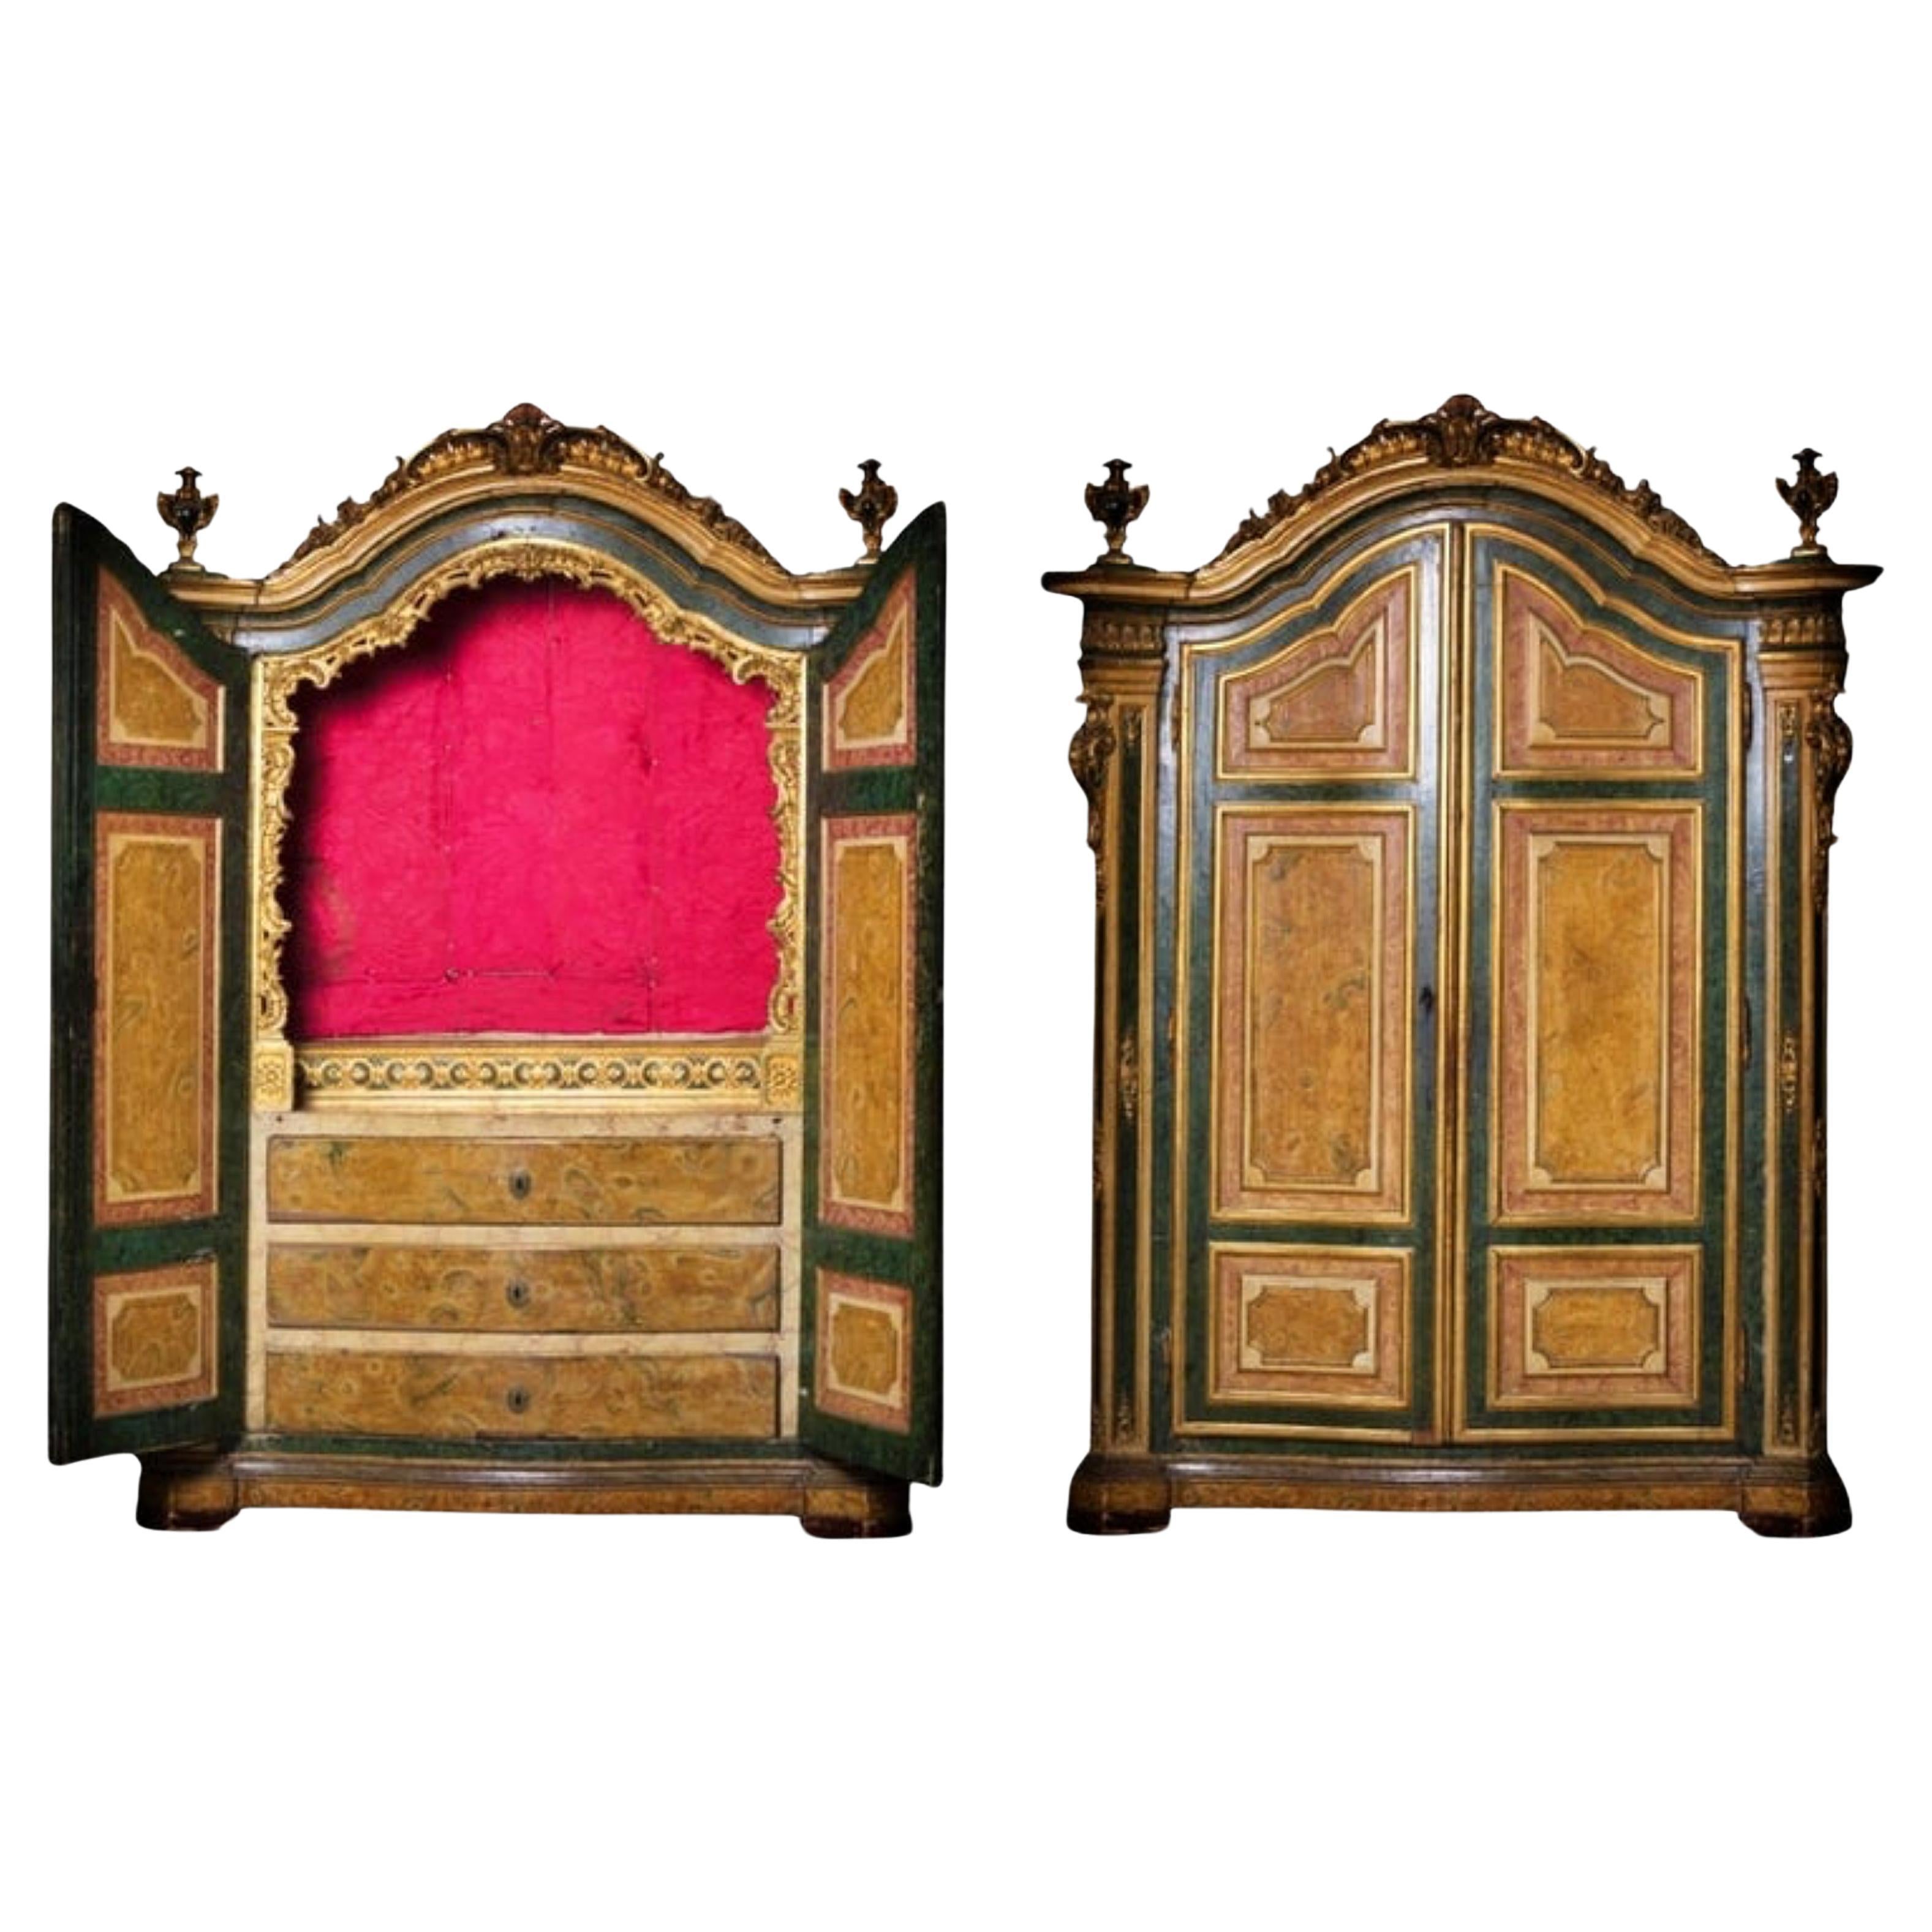 Rare and Important Portuguese Church Cabinet 18th Century Published